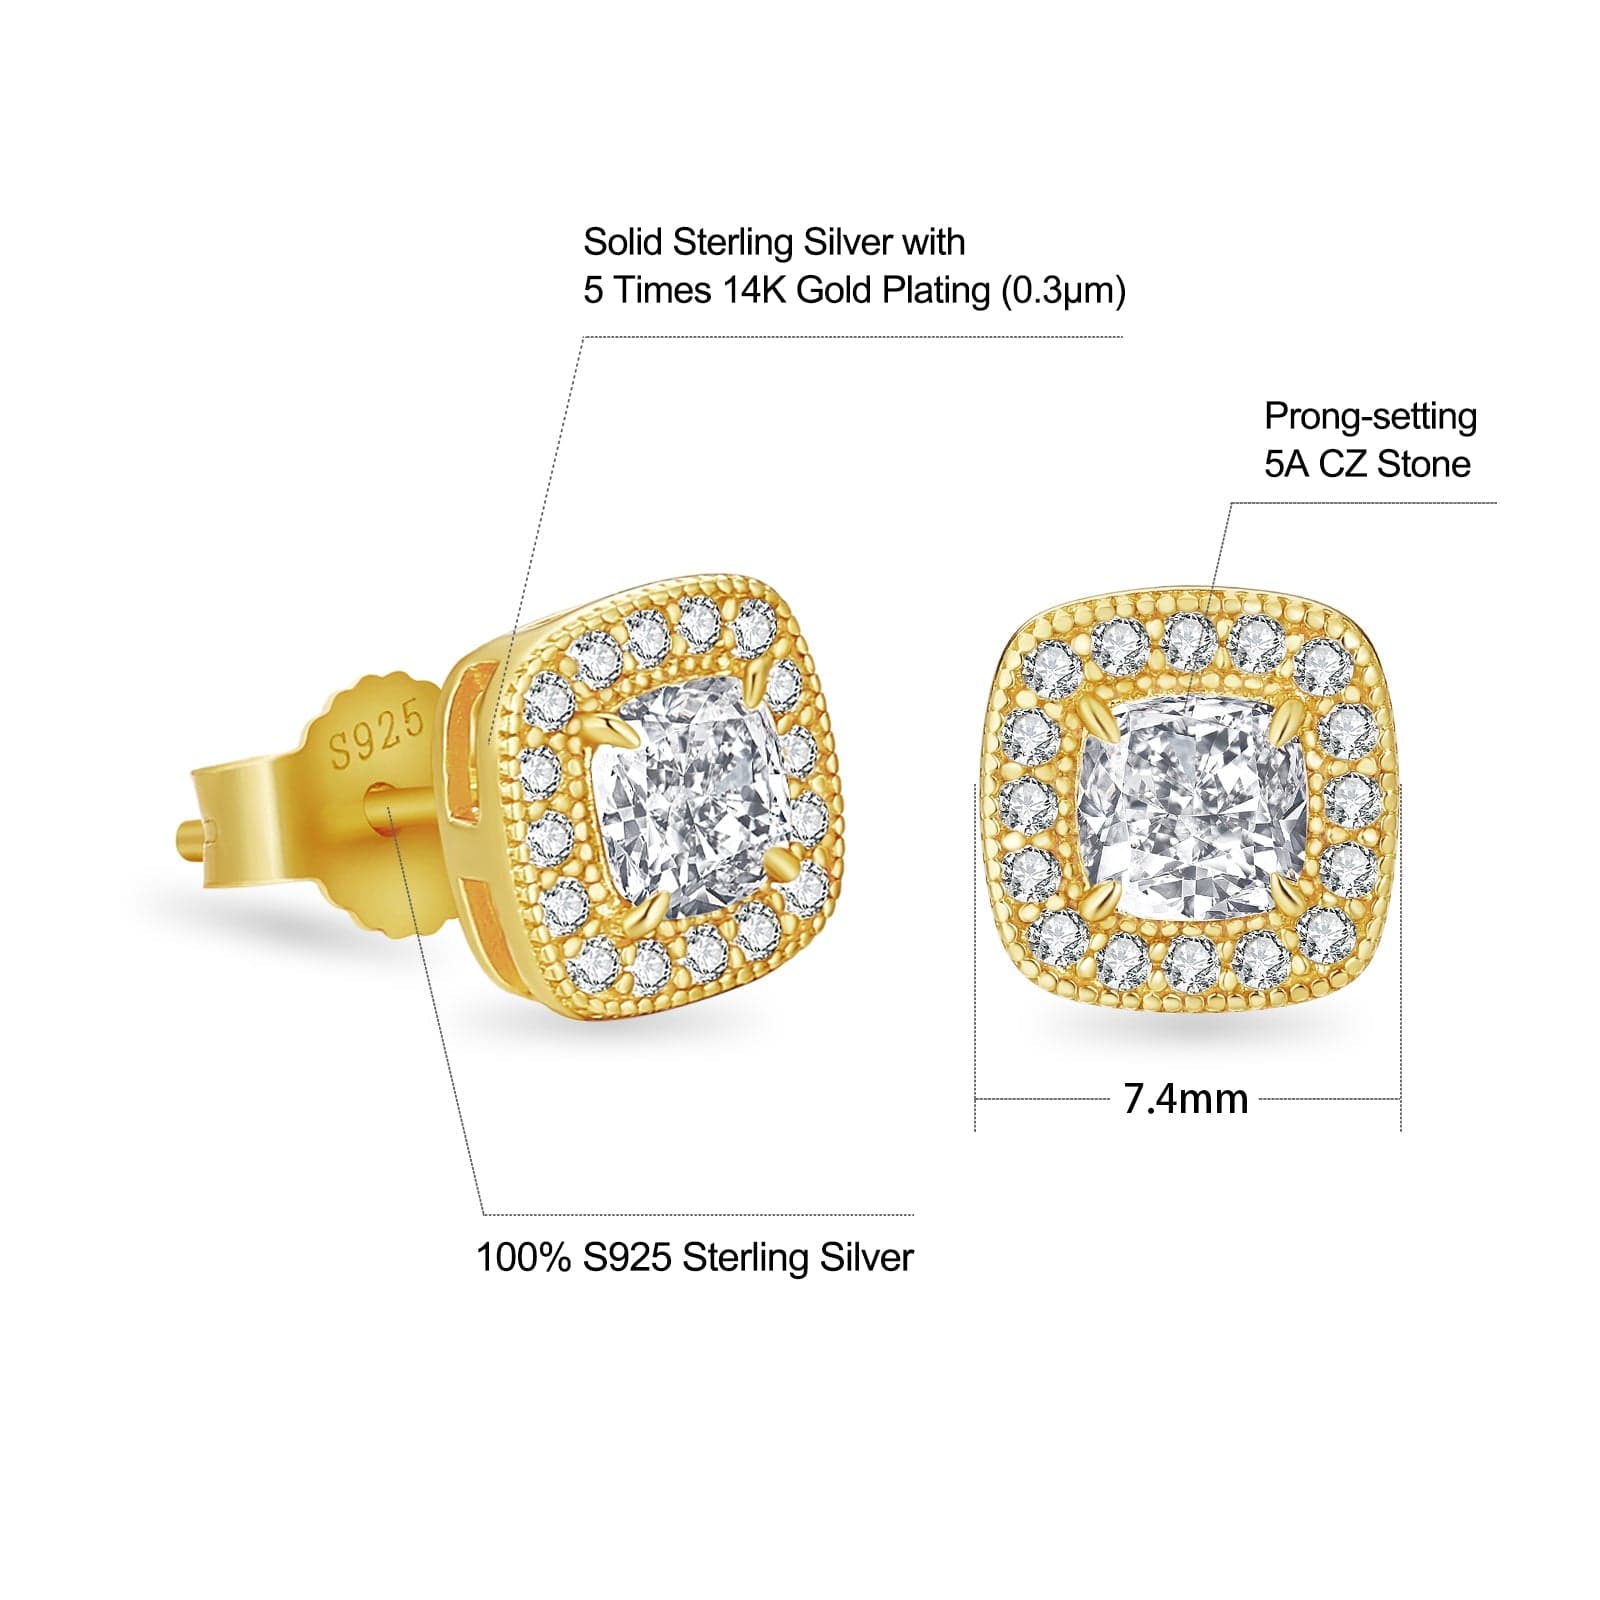 Iced Stud Earrings CZ Stone for Men and Women in 14K Gold / White Gold